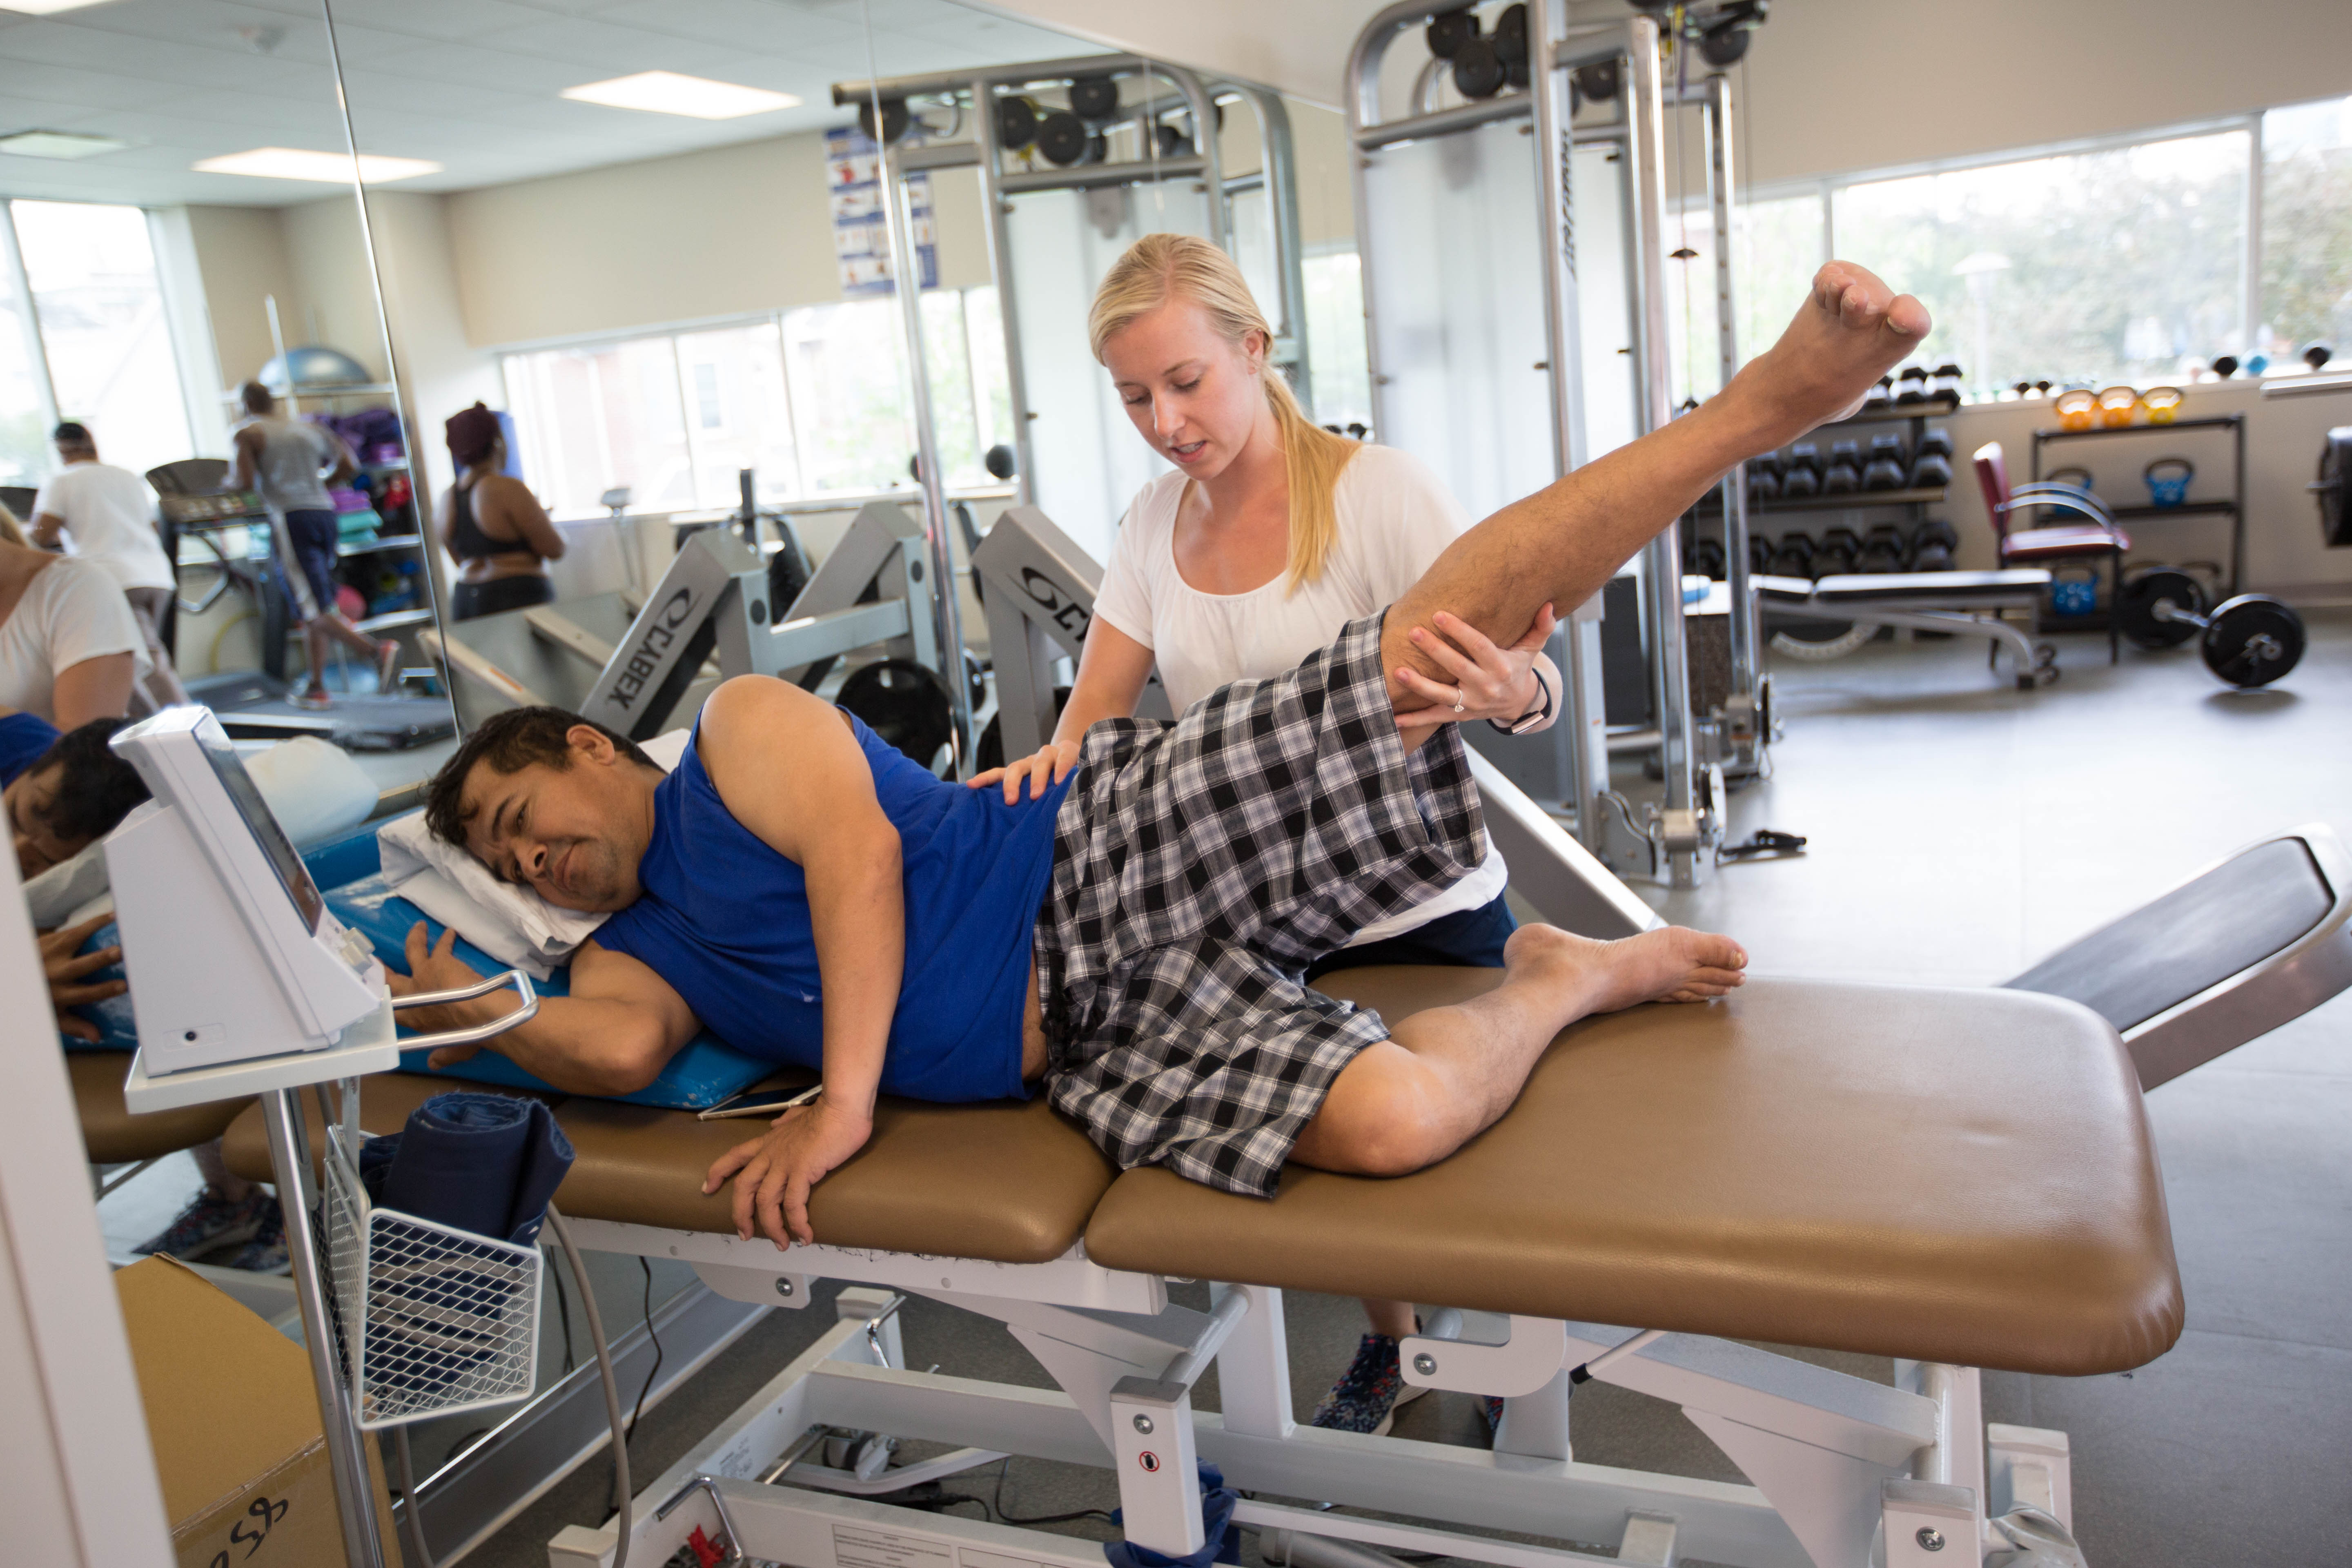 A physical therapy works with a patient on a table